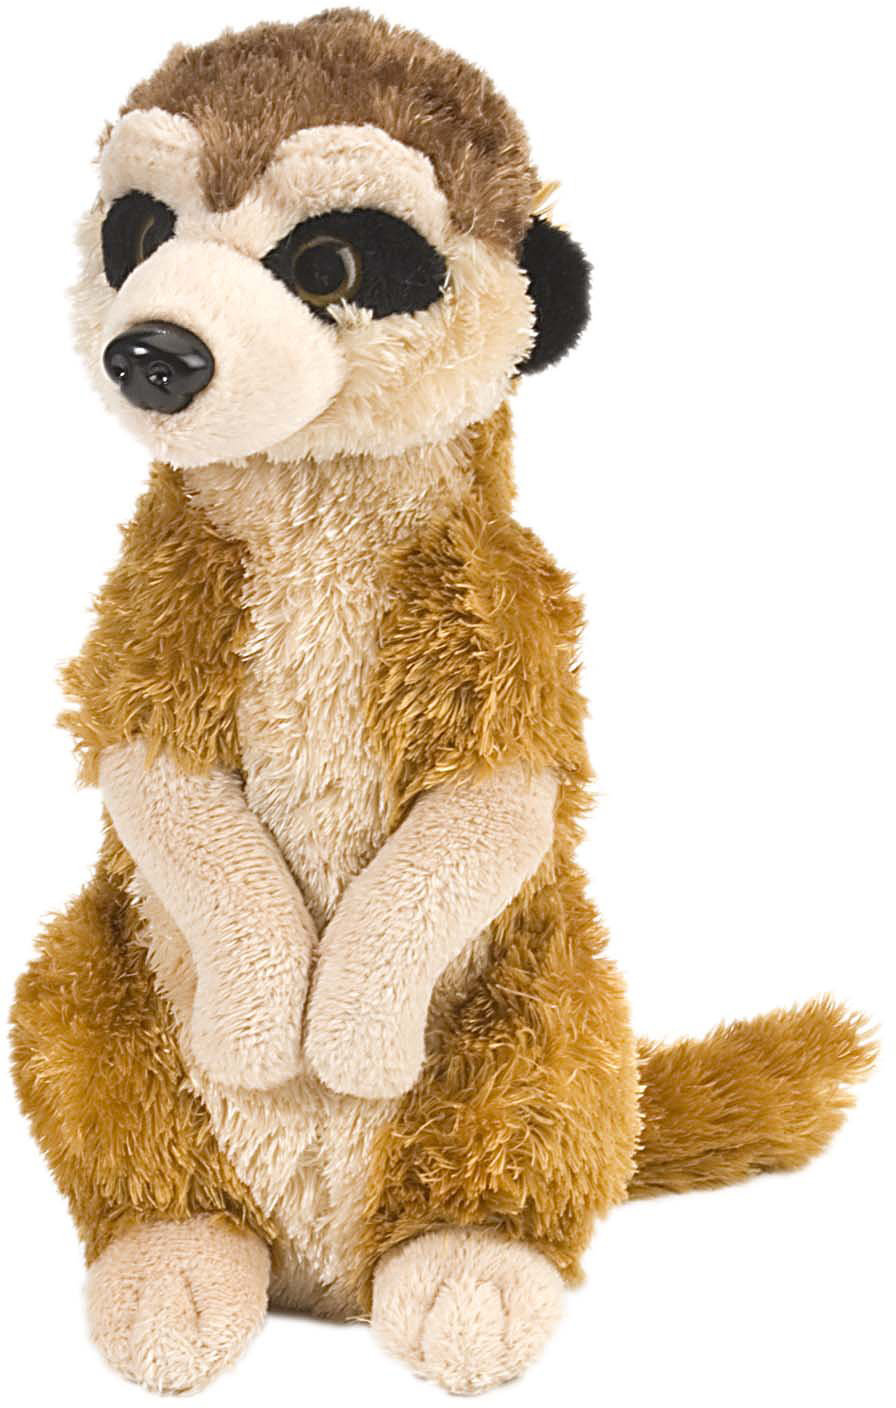 Best Meerkat Stuffed Animal in the world Learn more here 